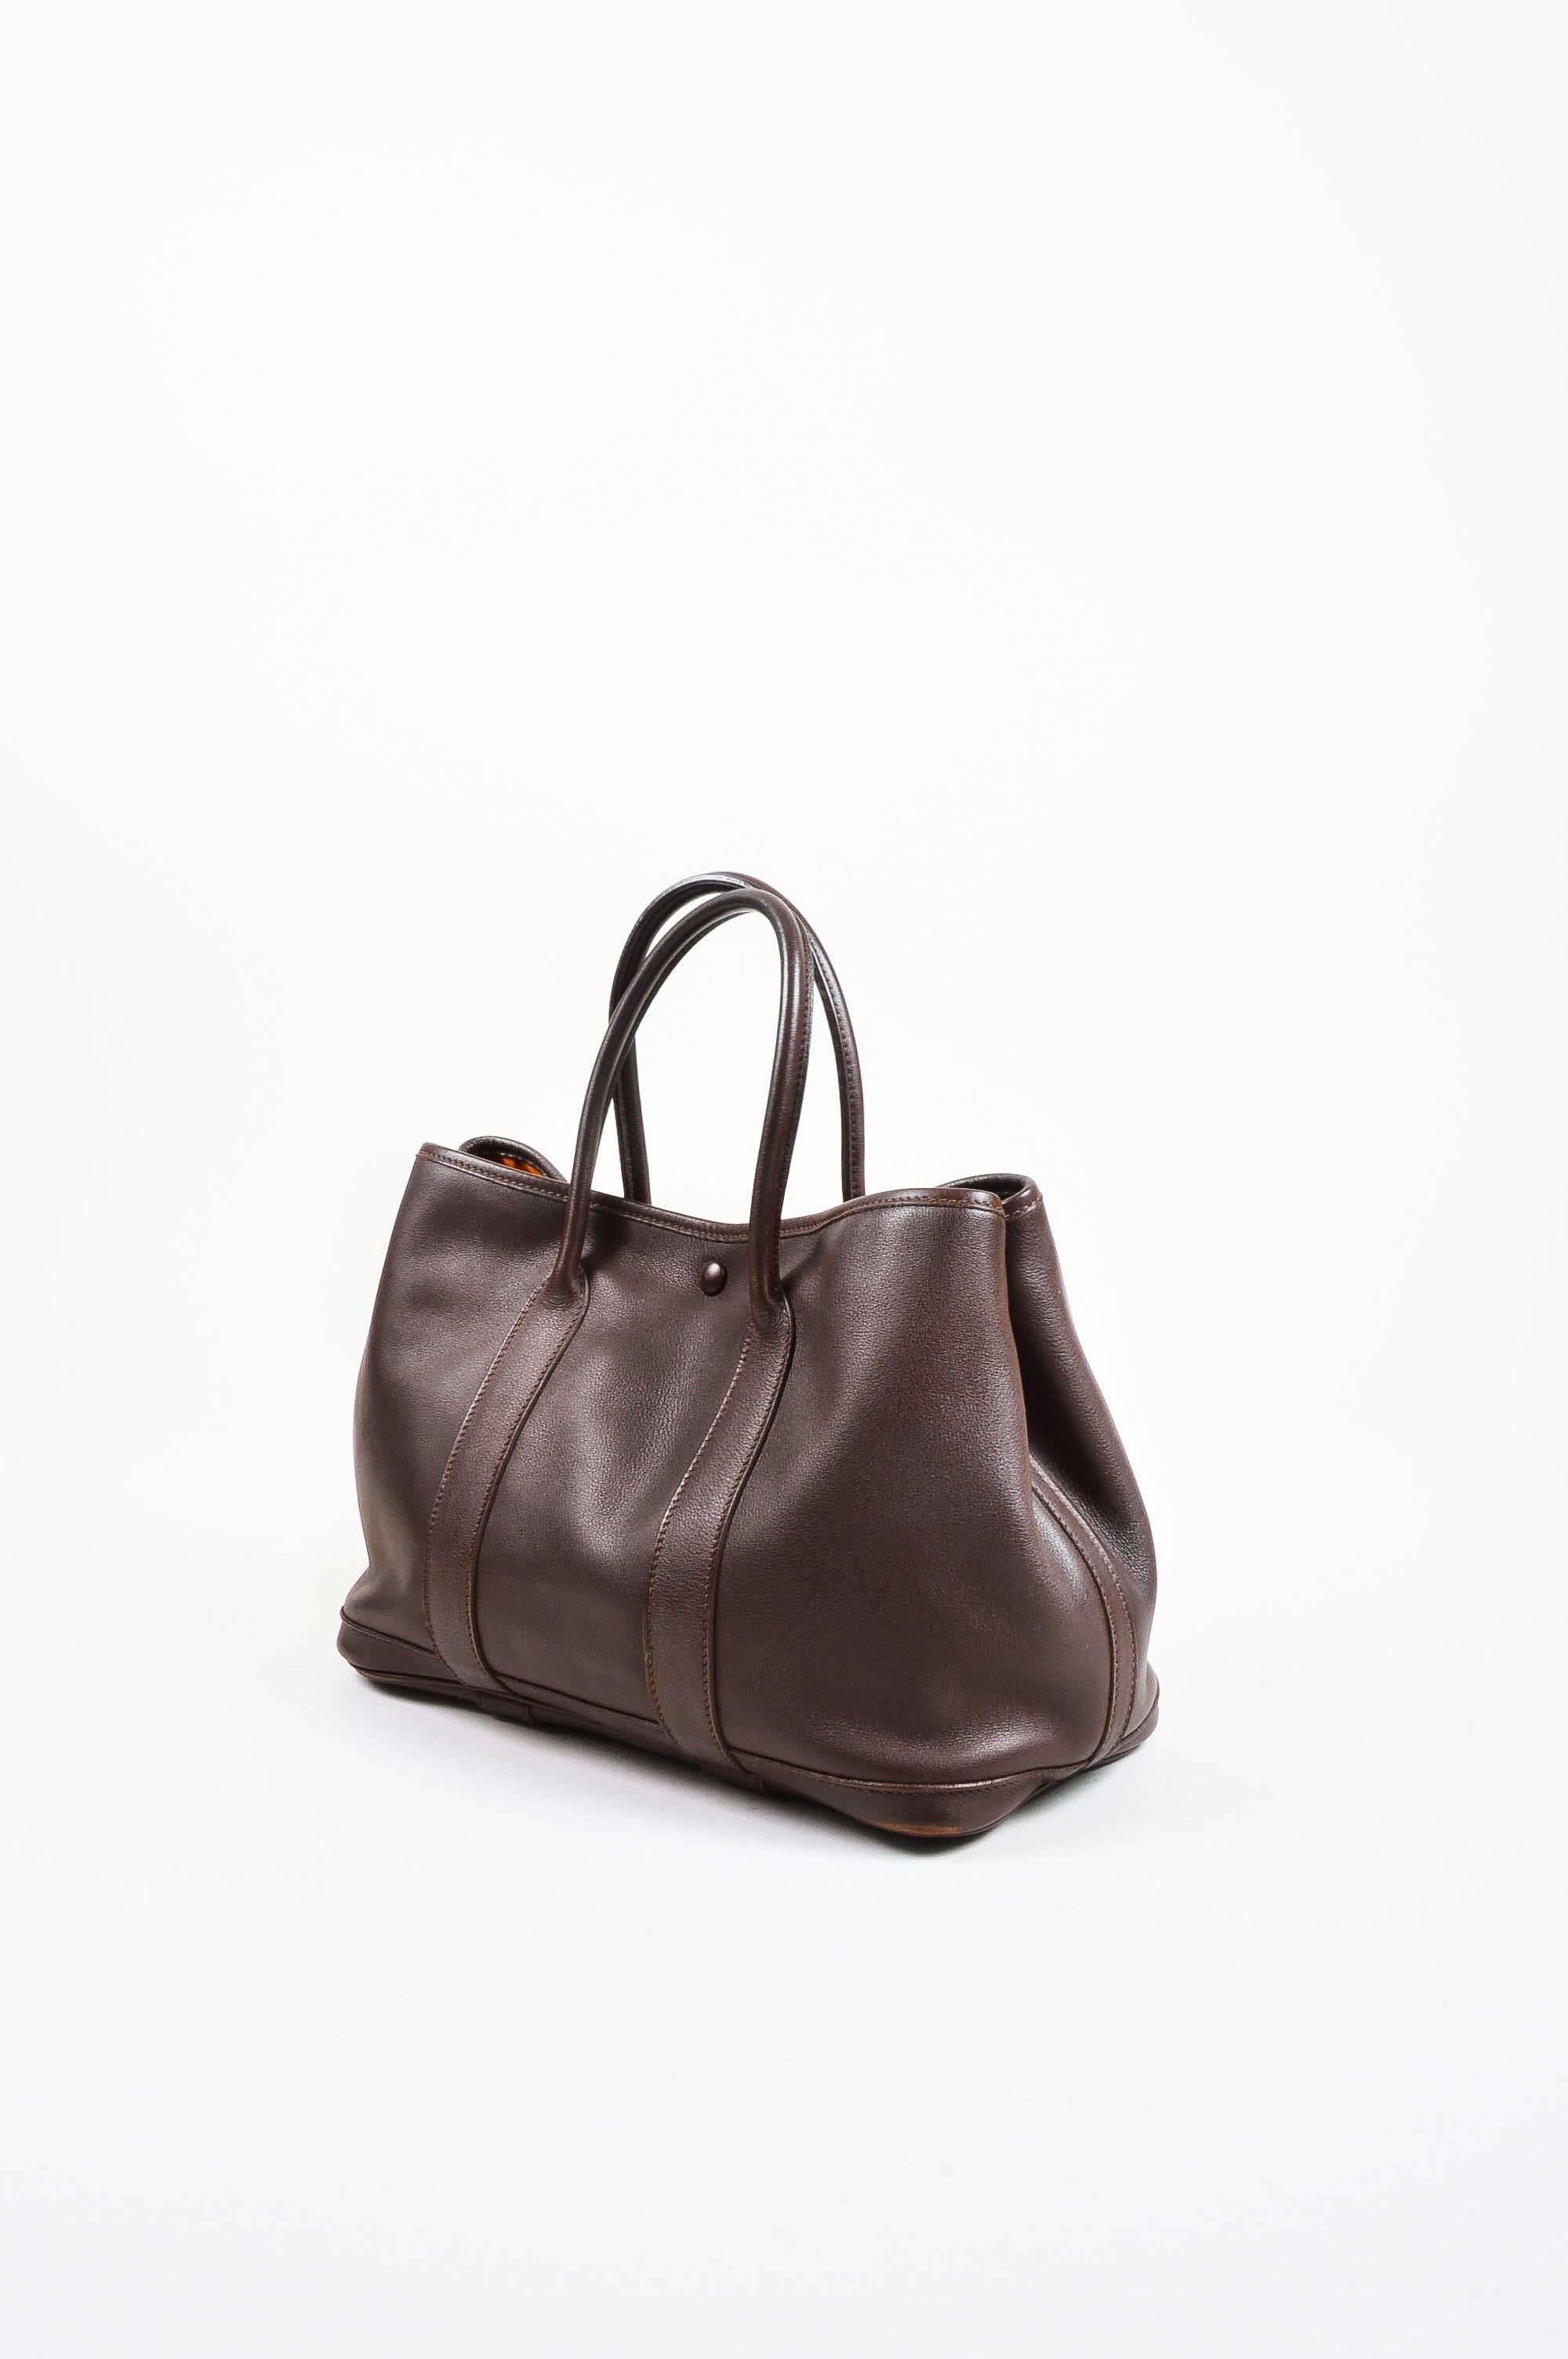 Sleek and versatile purse by Hermes that is perfect for daily use. The "Garden Party TPM" tote is a great size and shape to hold all of your essentials, including a large smart phone, long wallet, and even a small agenda. Brown,